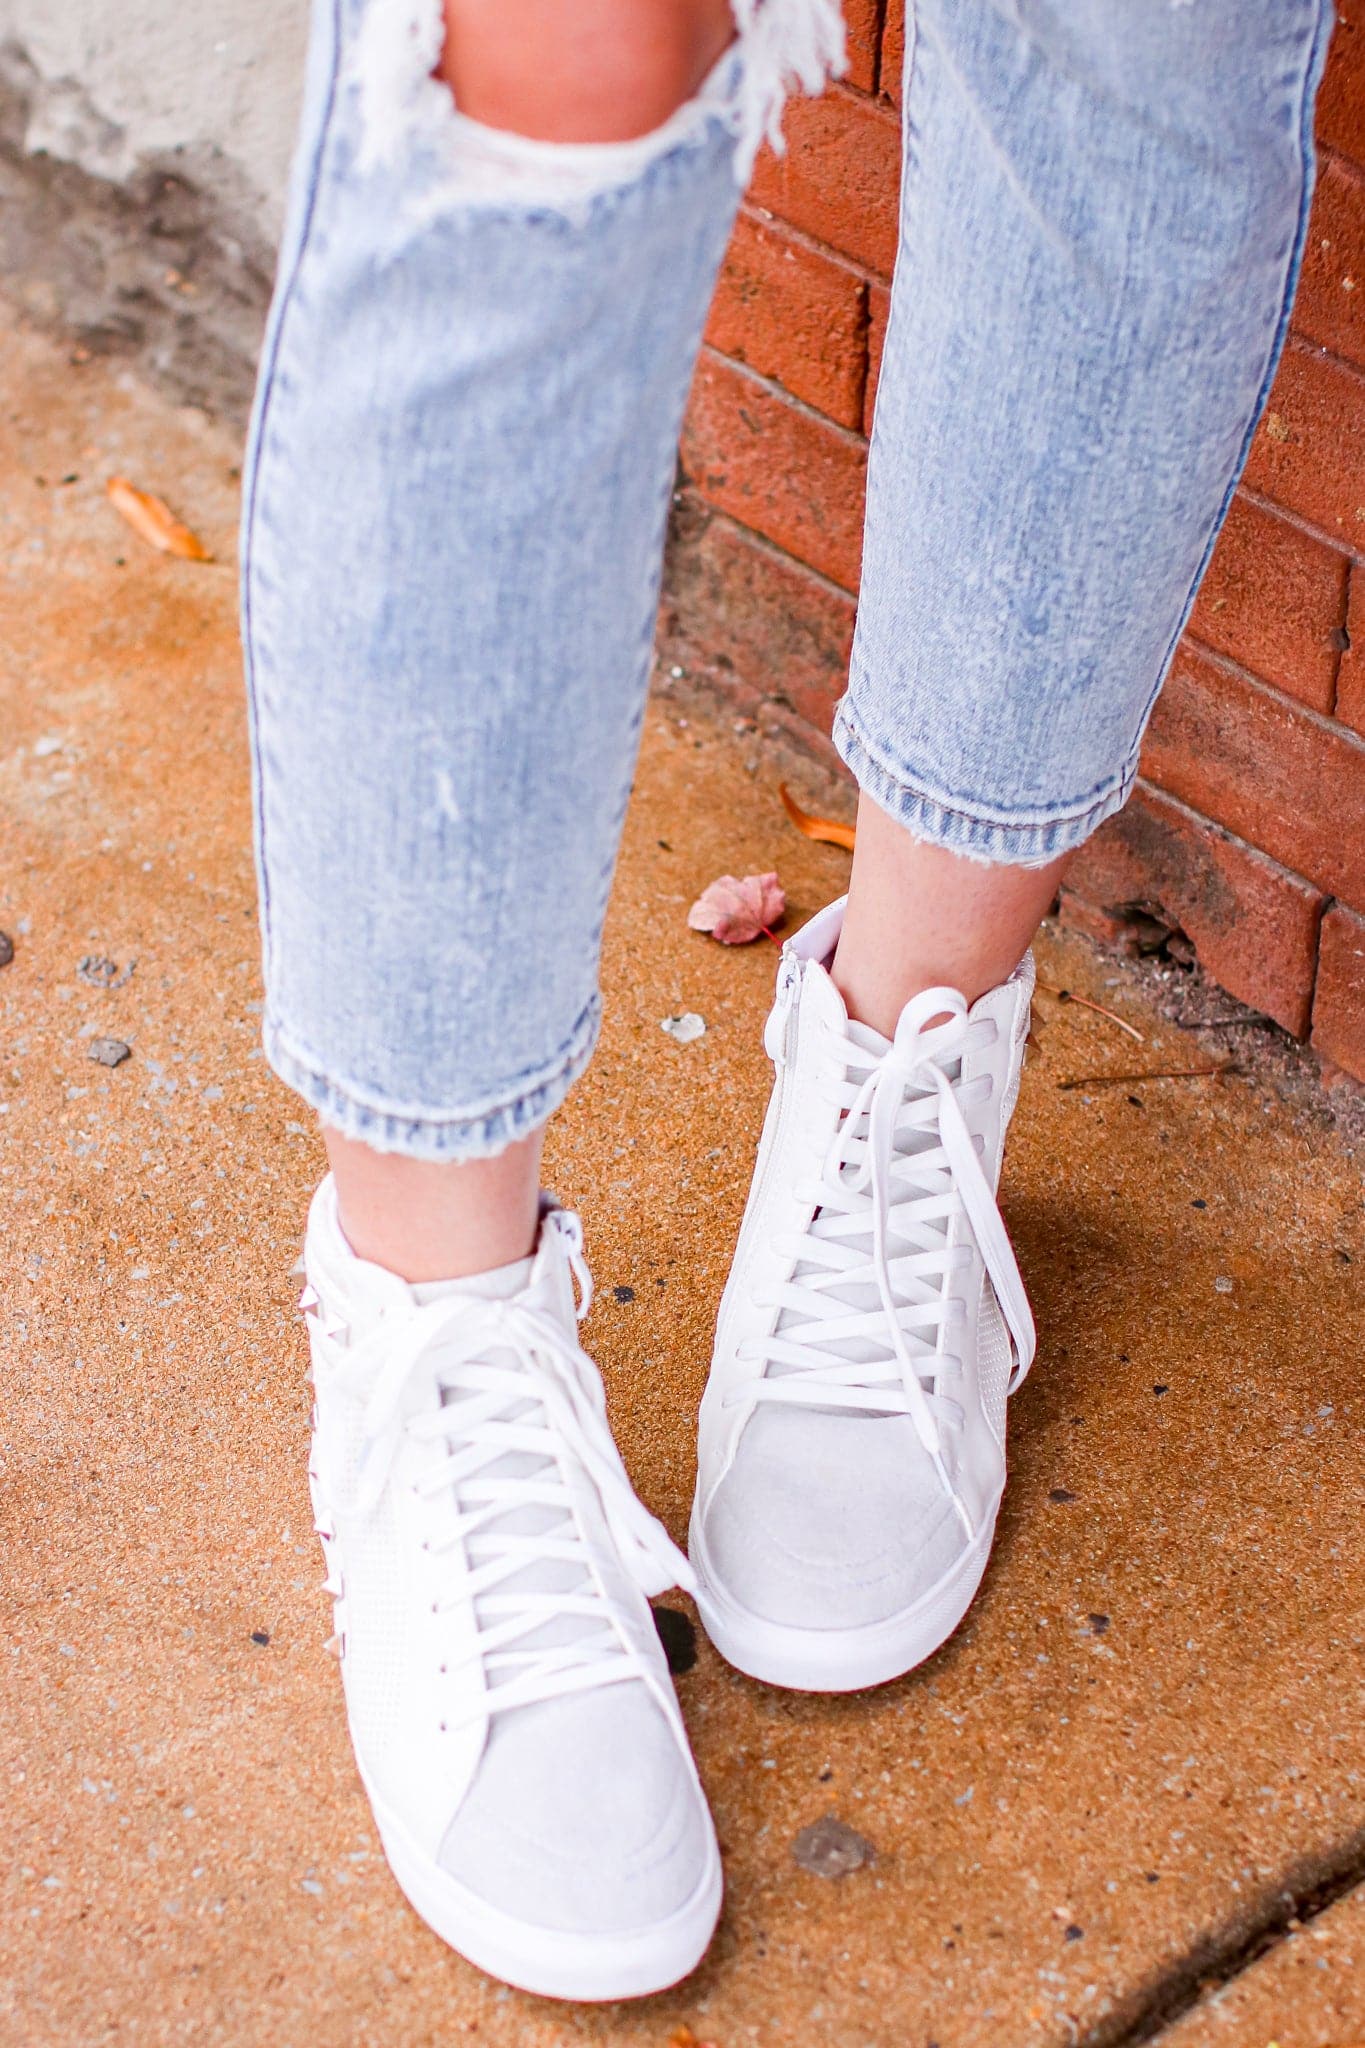  Lex Studded High Top Wedge Sneakers - FINAL SALE - kitchencabinetmagic